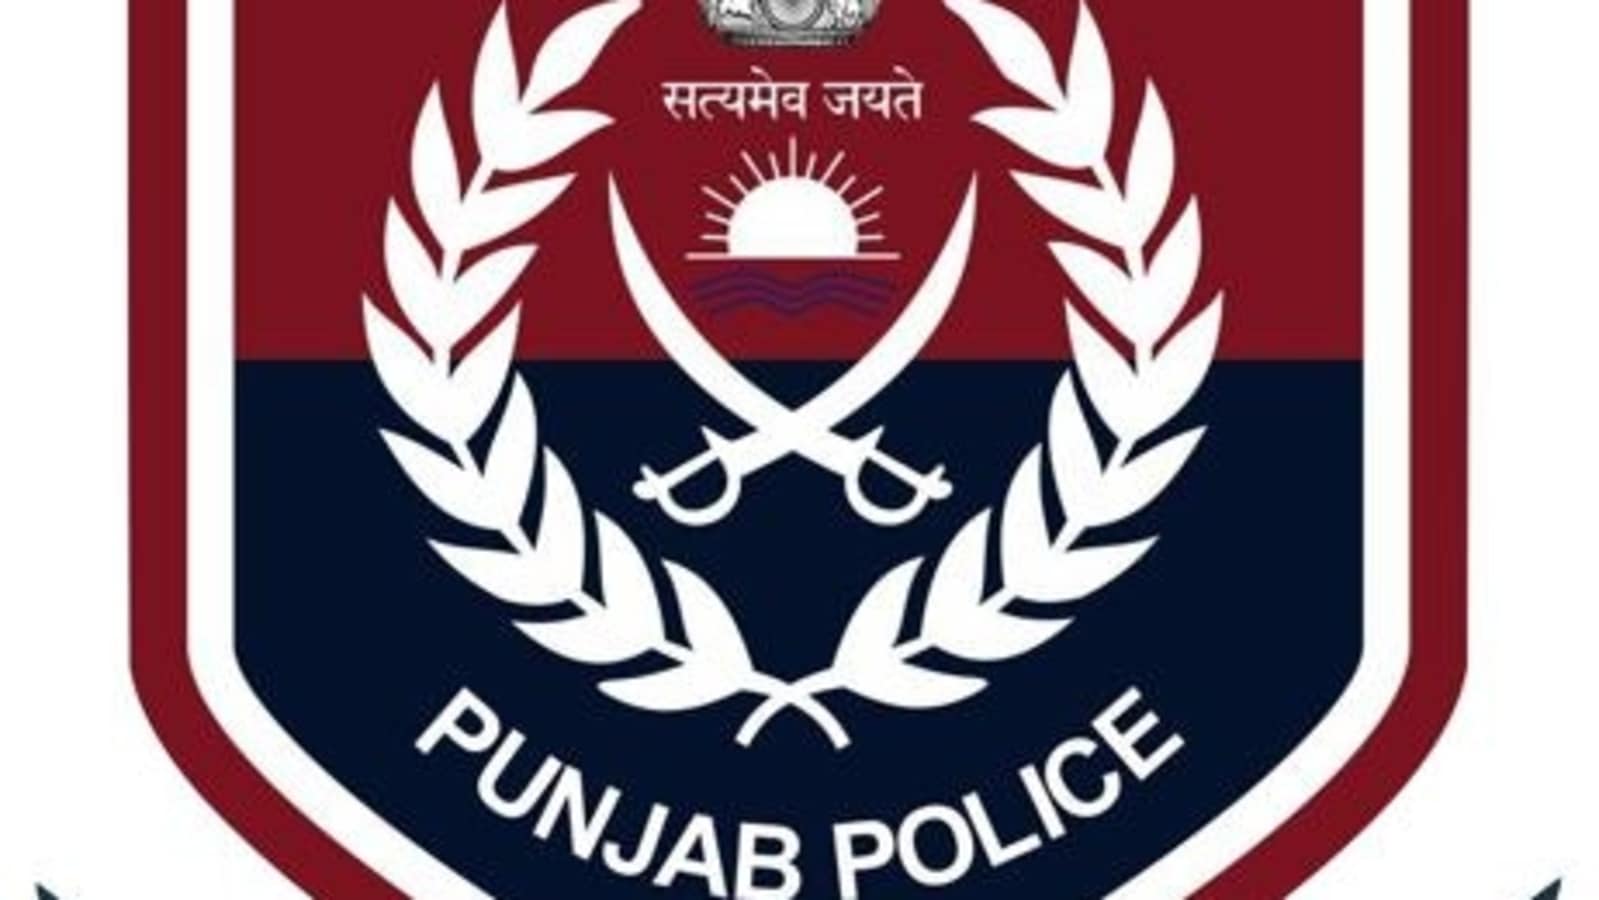 Punjab Police Recruitment 2023 Advt for 2,100 Constable, SI posts in January Hindustan Times